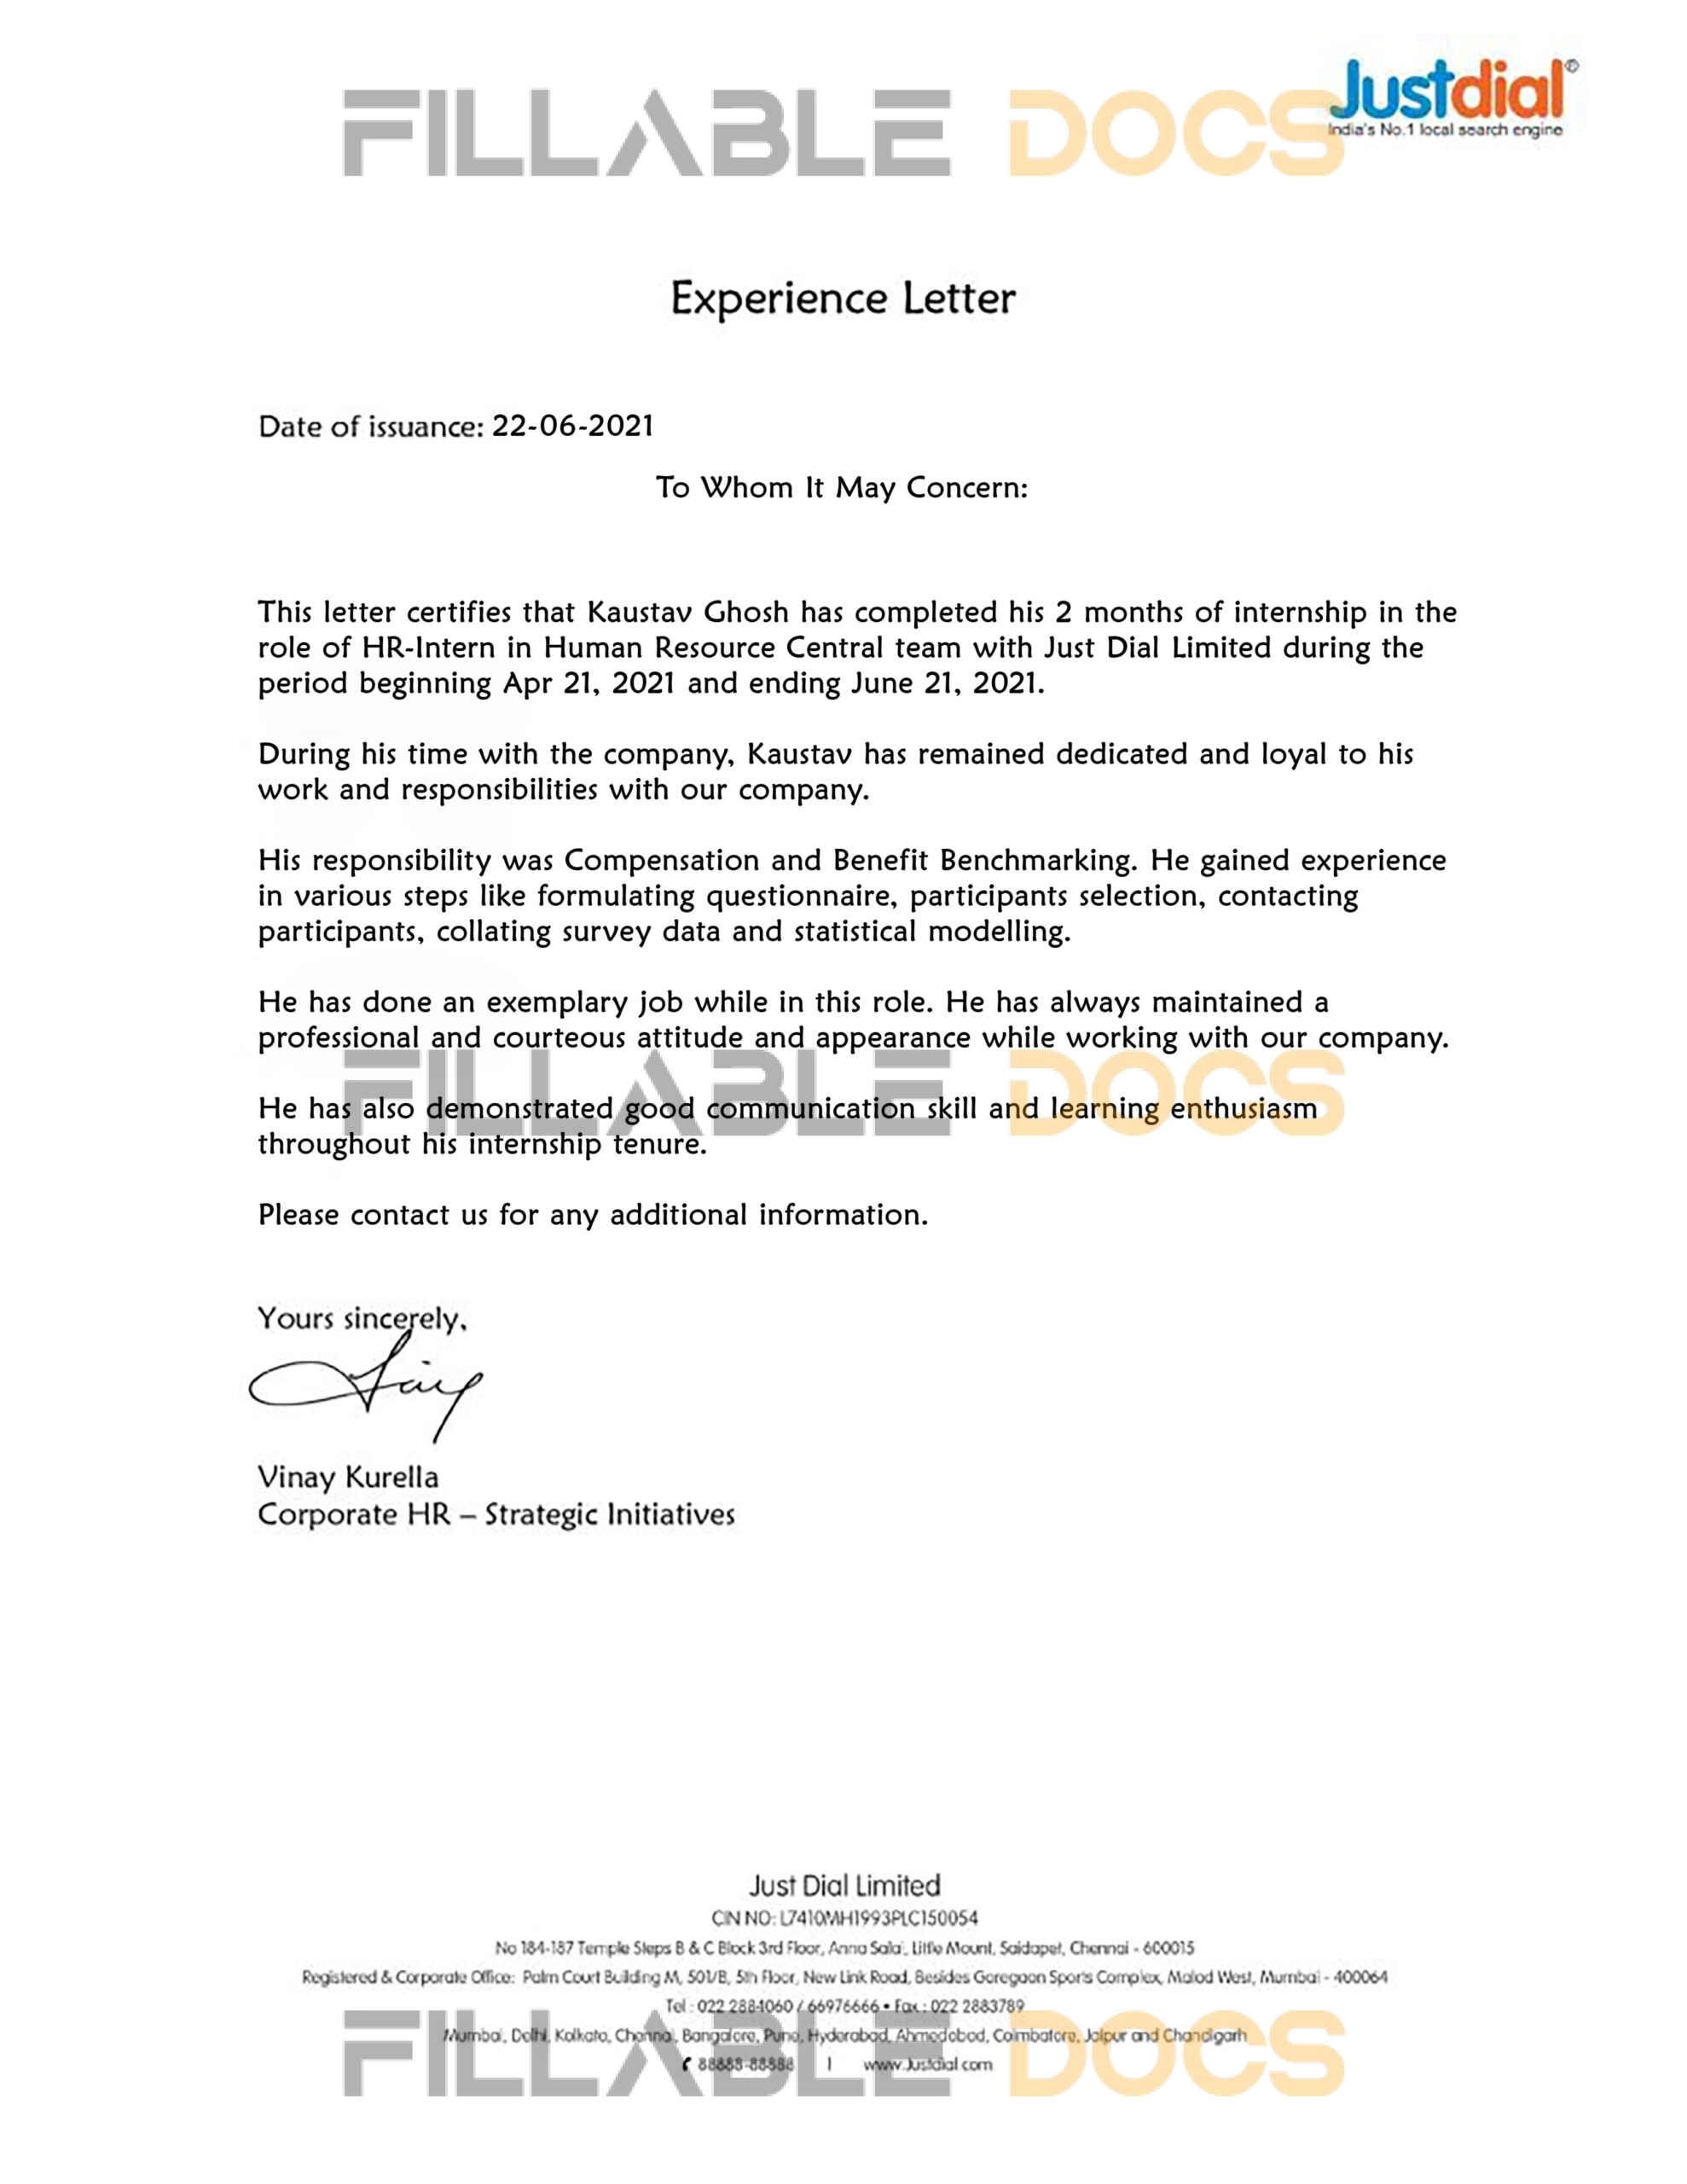 Purchase Realistic Fake justdial Experience Certificate Templates | Easily Editable